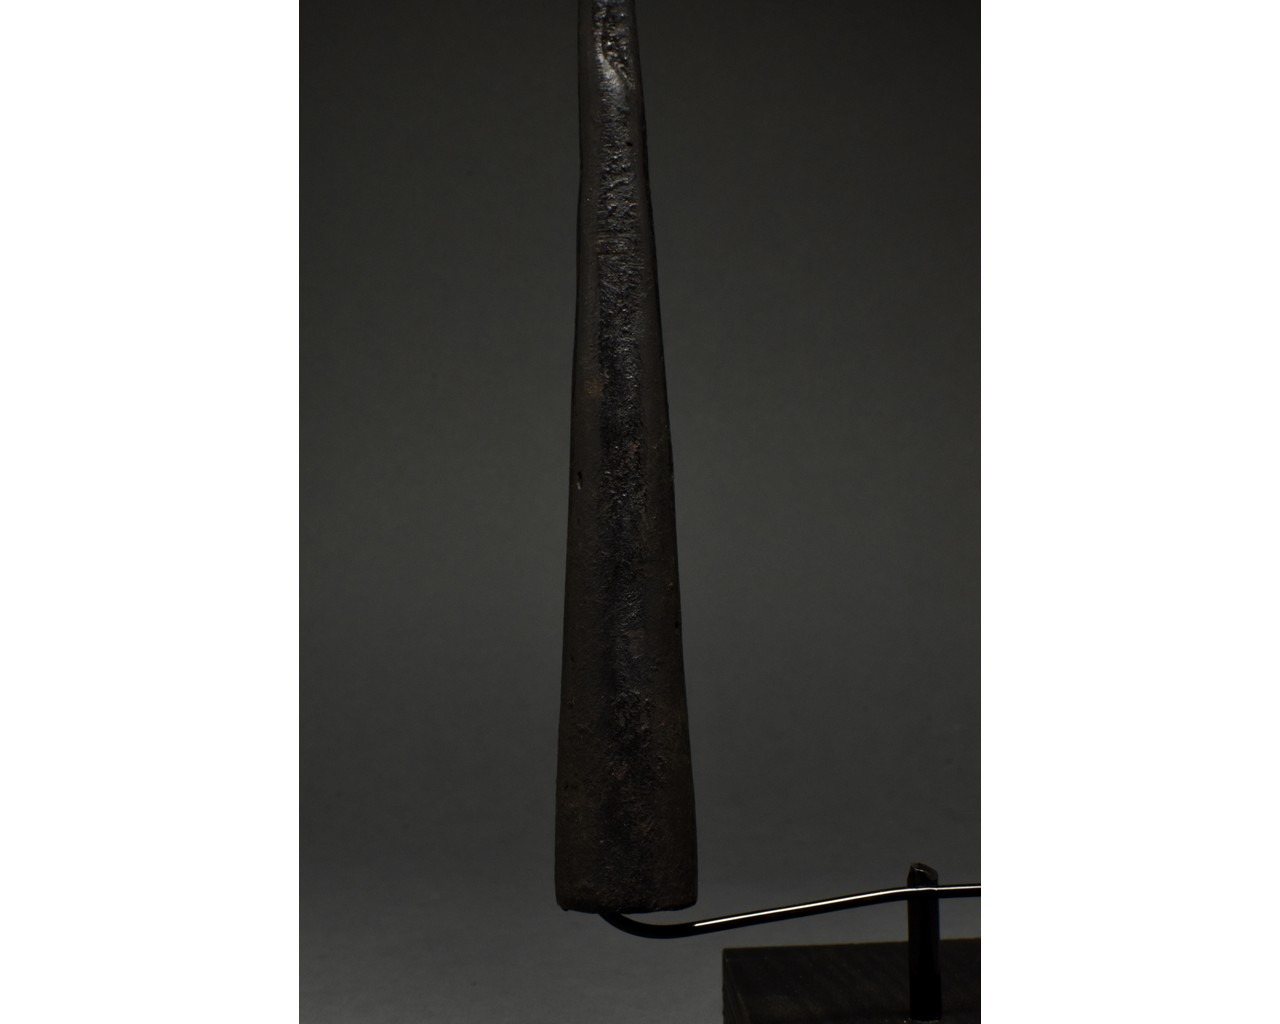 ROMAN BARBED IRON PILUM SPEAR WITH BASE - Image 5 of 8